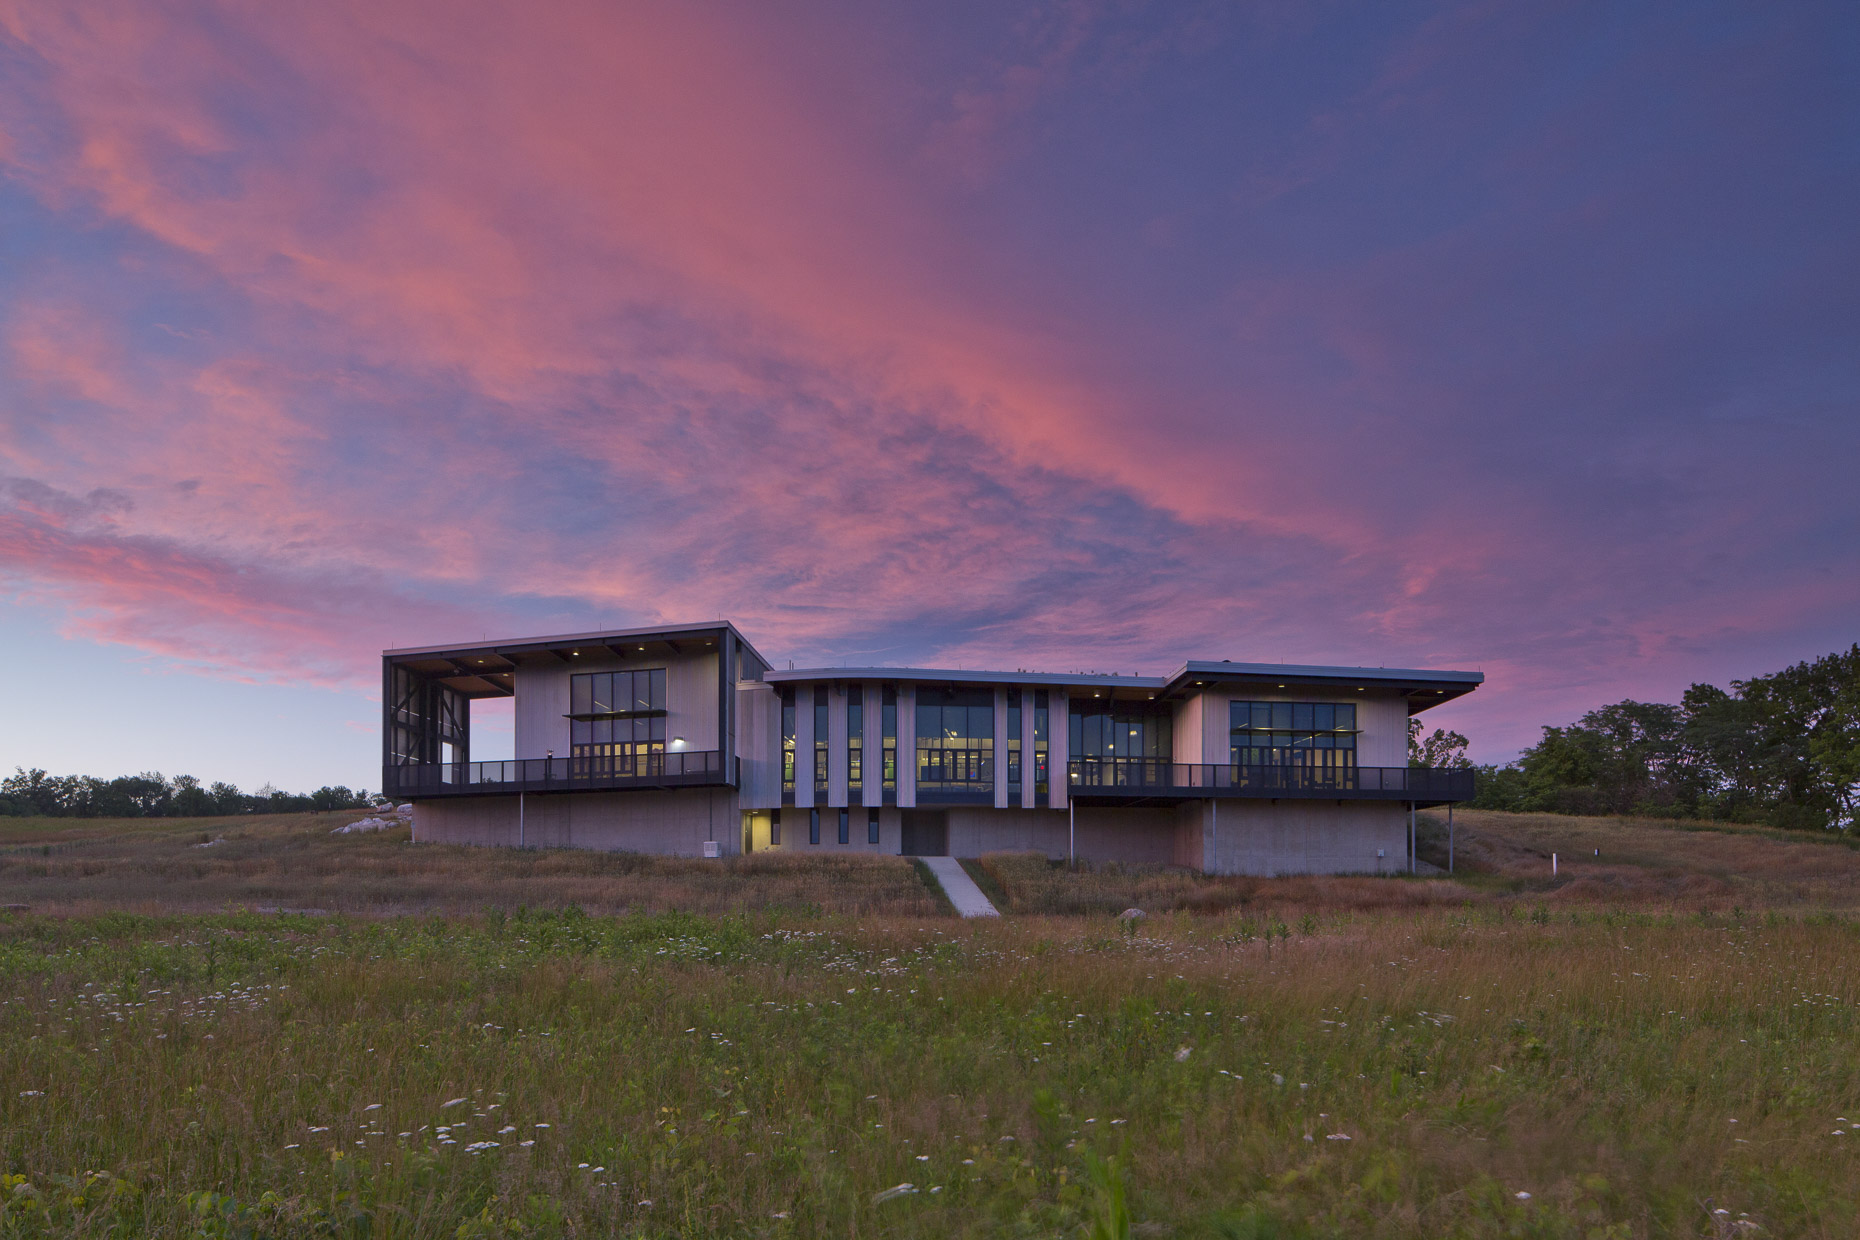 Battelle-Darby Creek Nature Center by DesignGroup photographed by Brad Feinknopf based in Columbus, Ohio